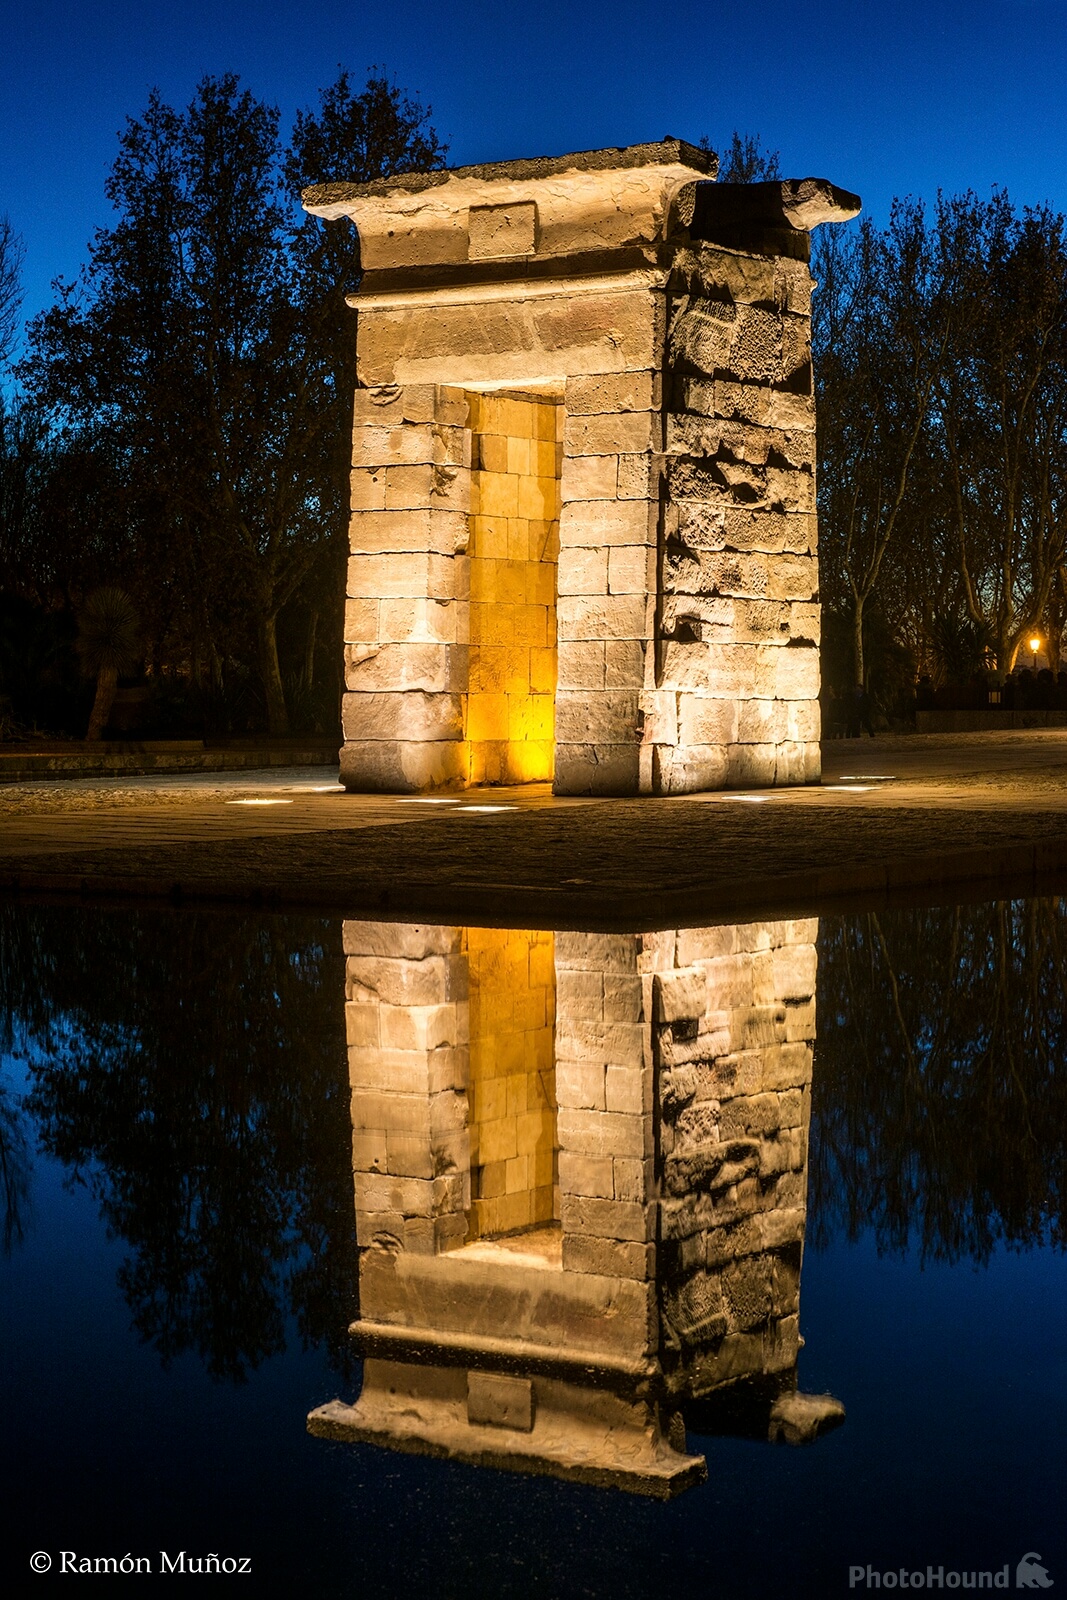 Image of The Egyptian Temple of Debod by Ramón Muñoz